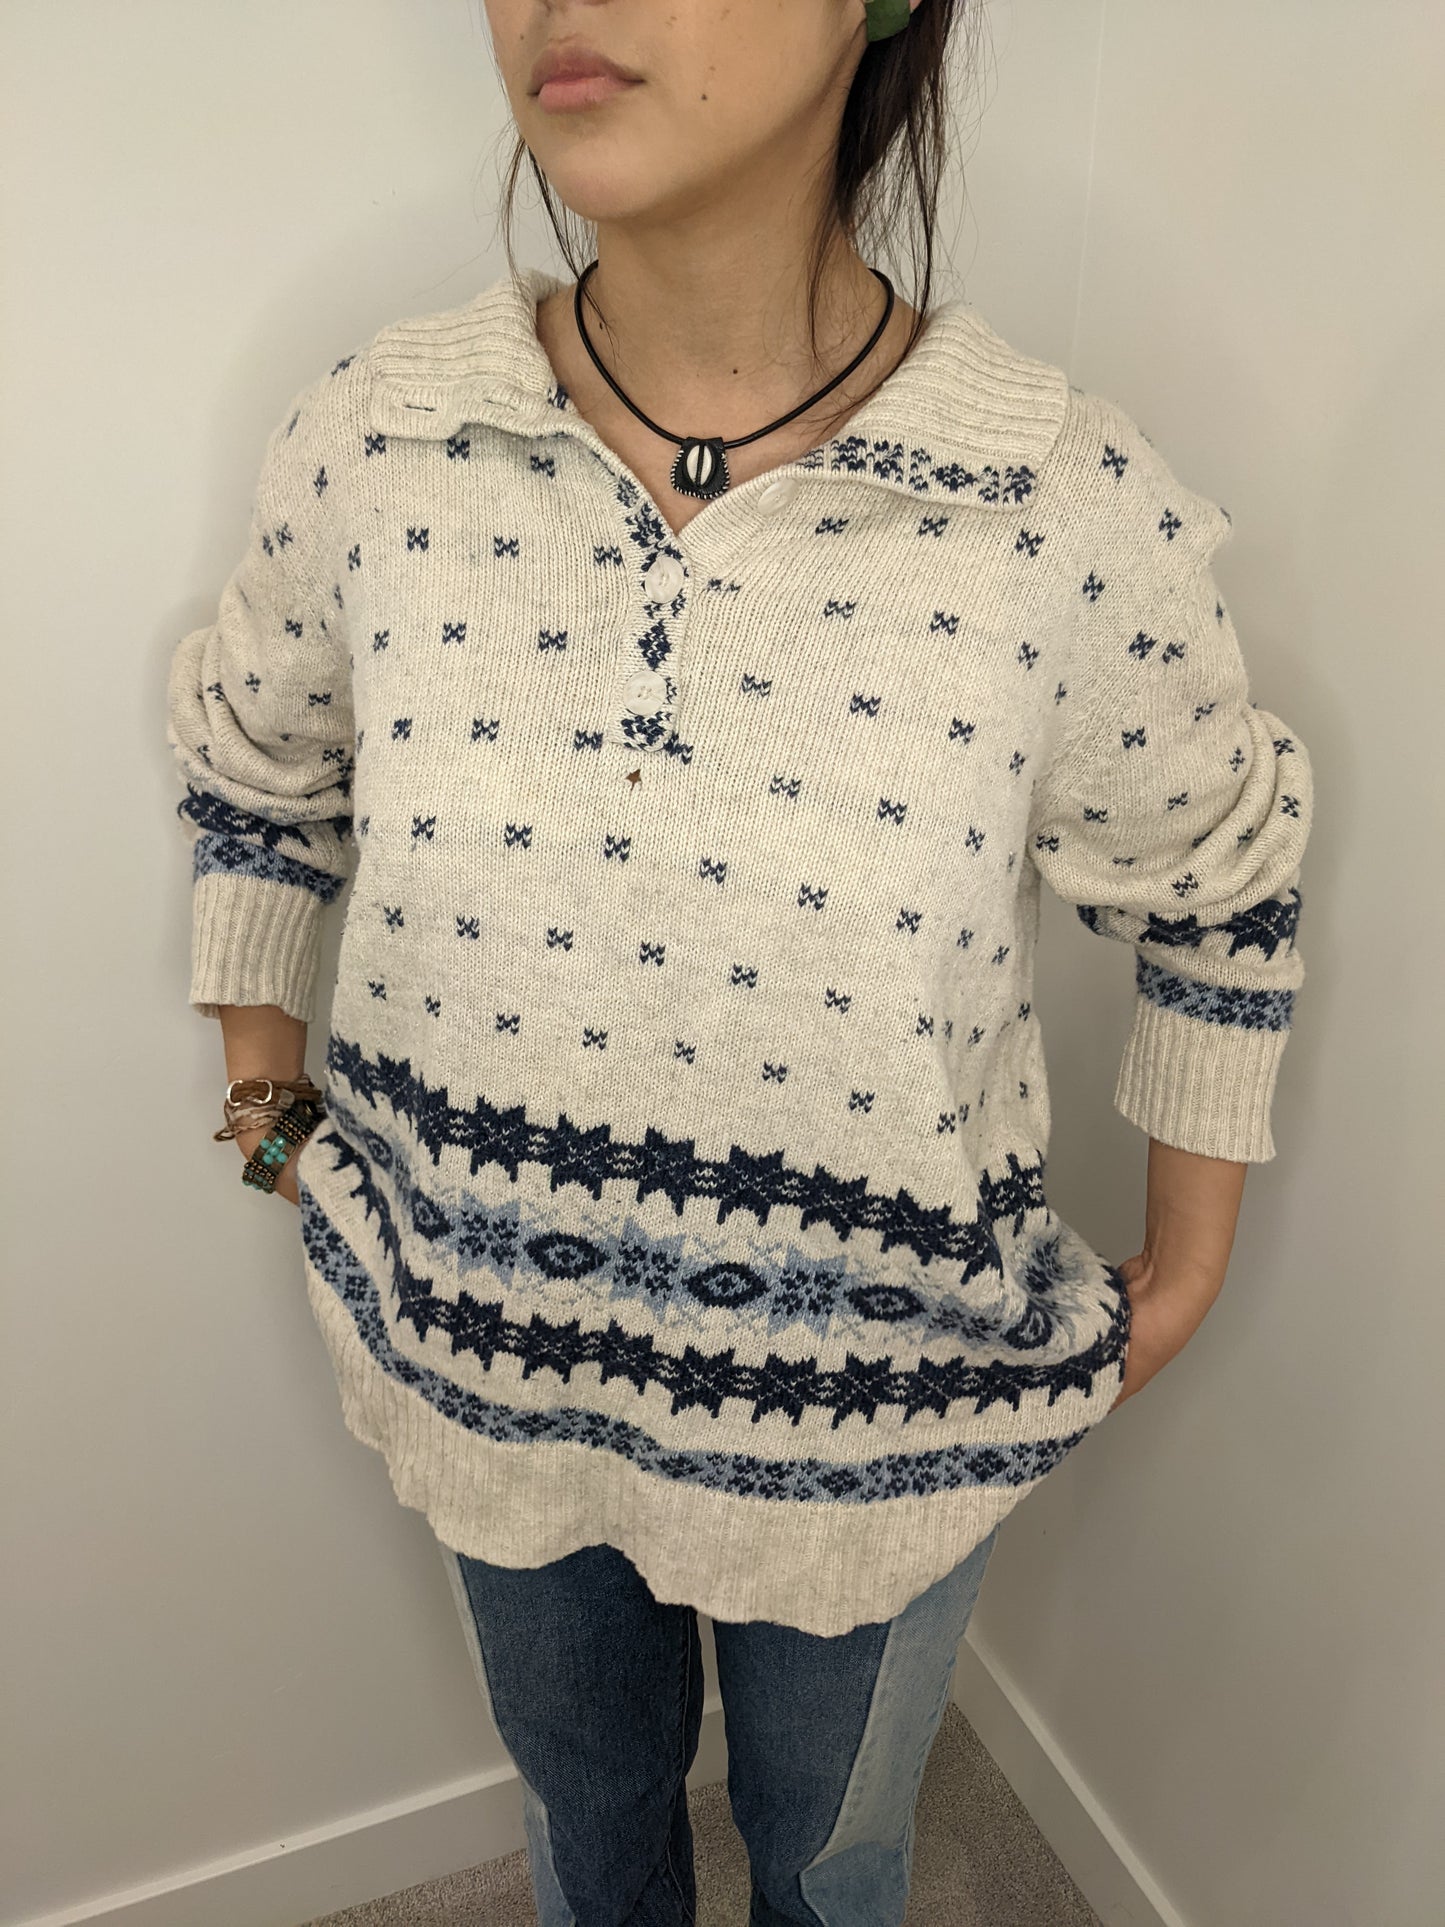 Vintage North Crest Cream and Striped Blue Sweater